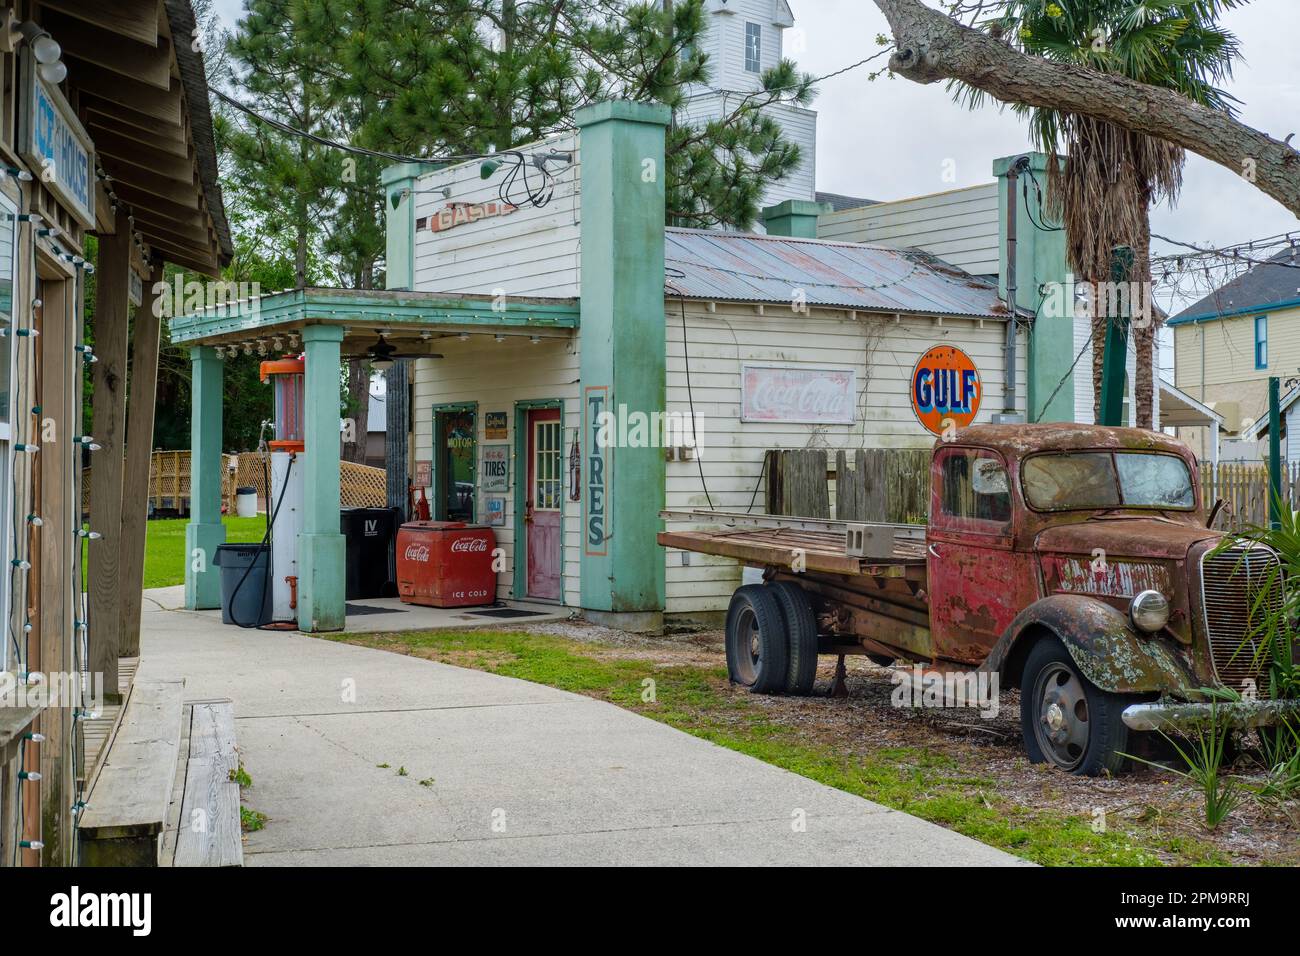 KENNER, LA, USA - MARCH 31, 2023: Replicated 1930's small town with retro gas station and rusted vintage 1930s Ford pickup truck in Heritage Park Stock Photo